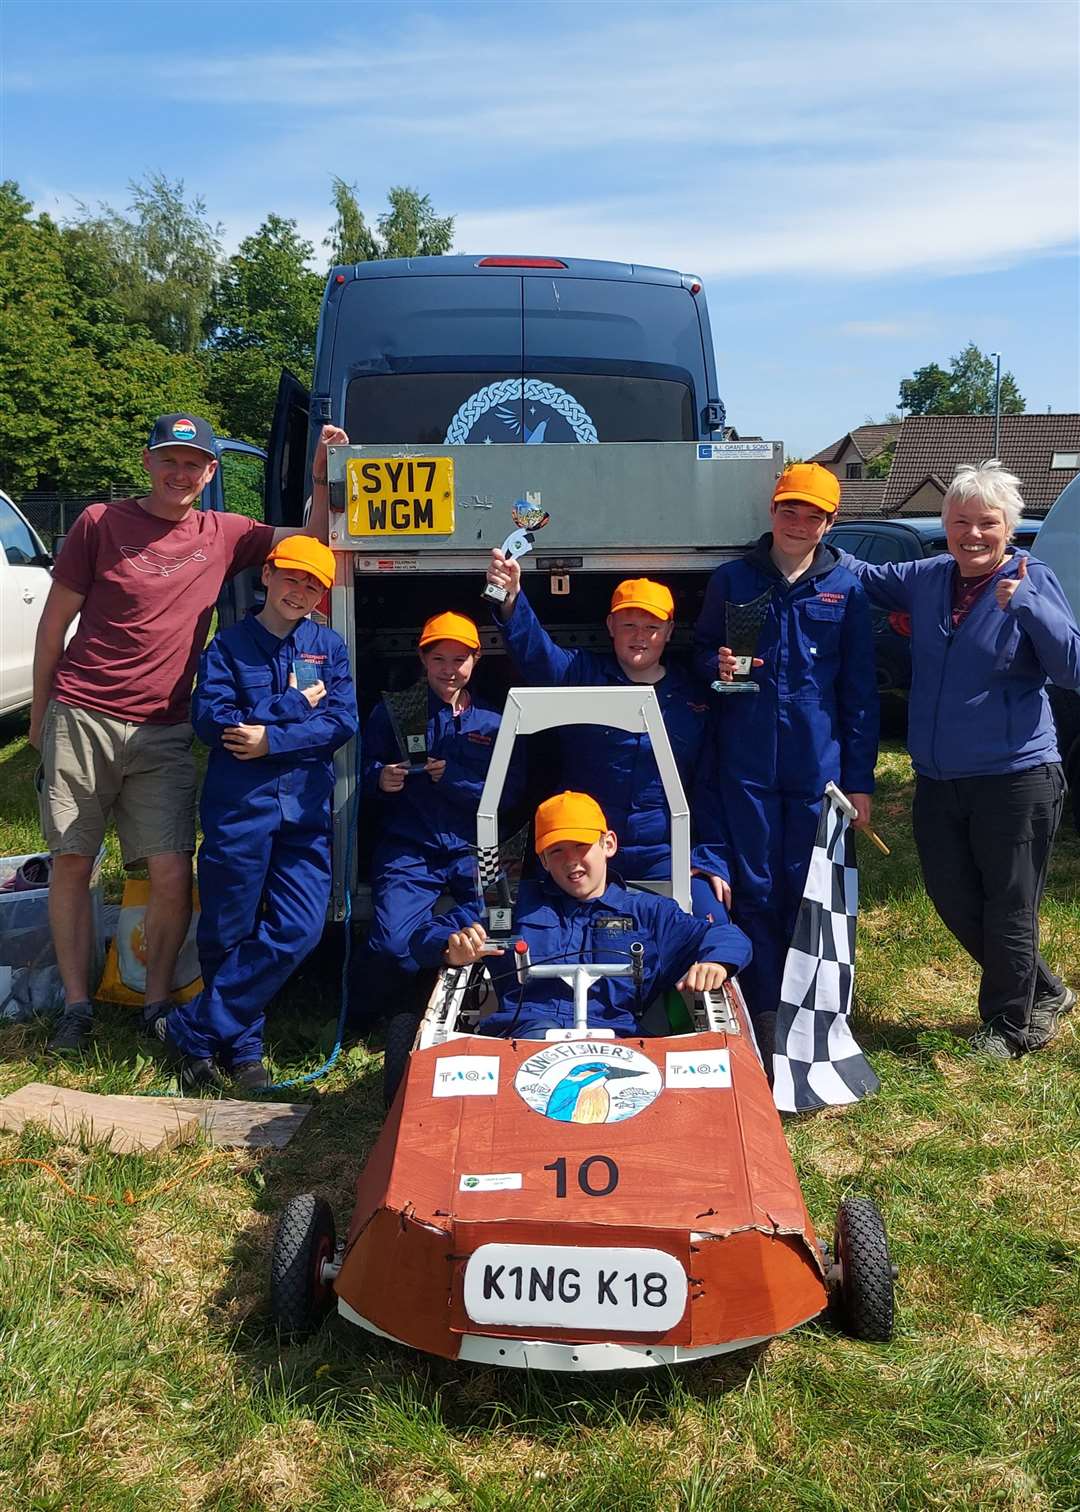 The Goblin car initiative is run by Greenpower Education Trust, a UK based charity which aims to get young people enthusiastic about science and engineering by challenging them to design, build and race an electric car.